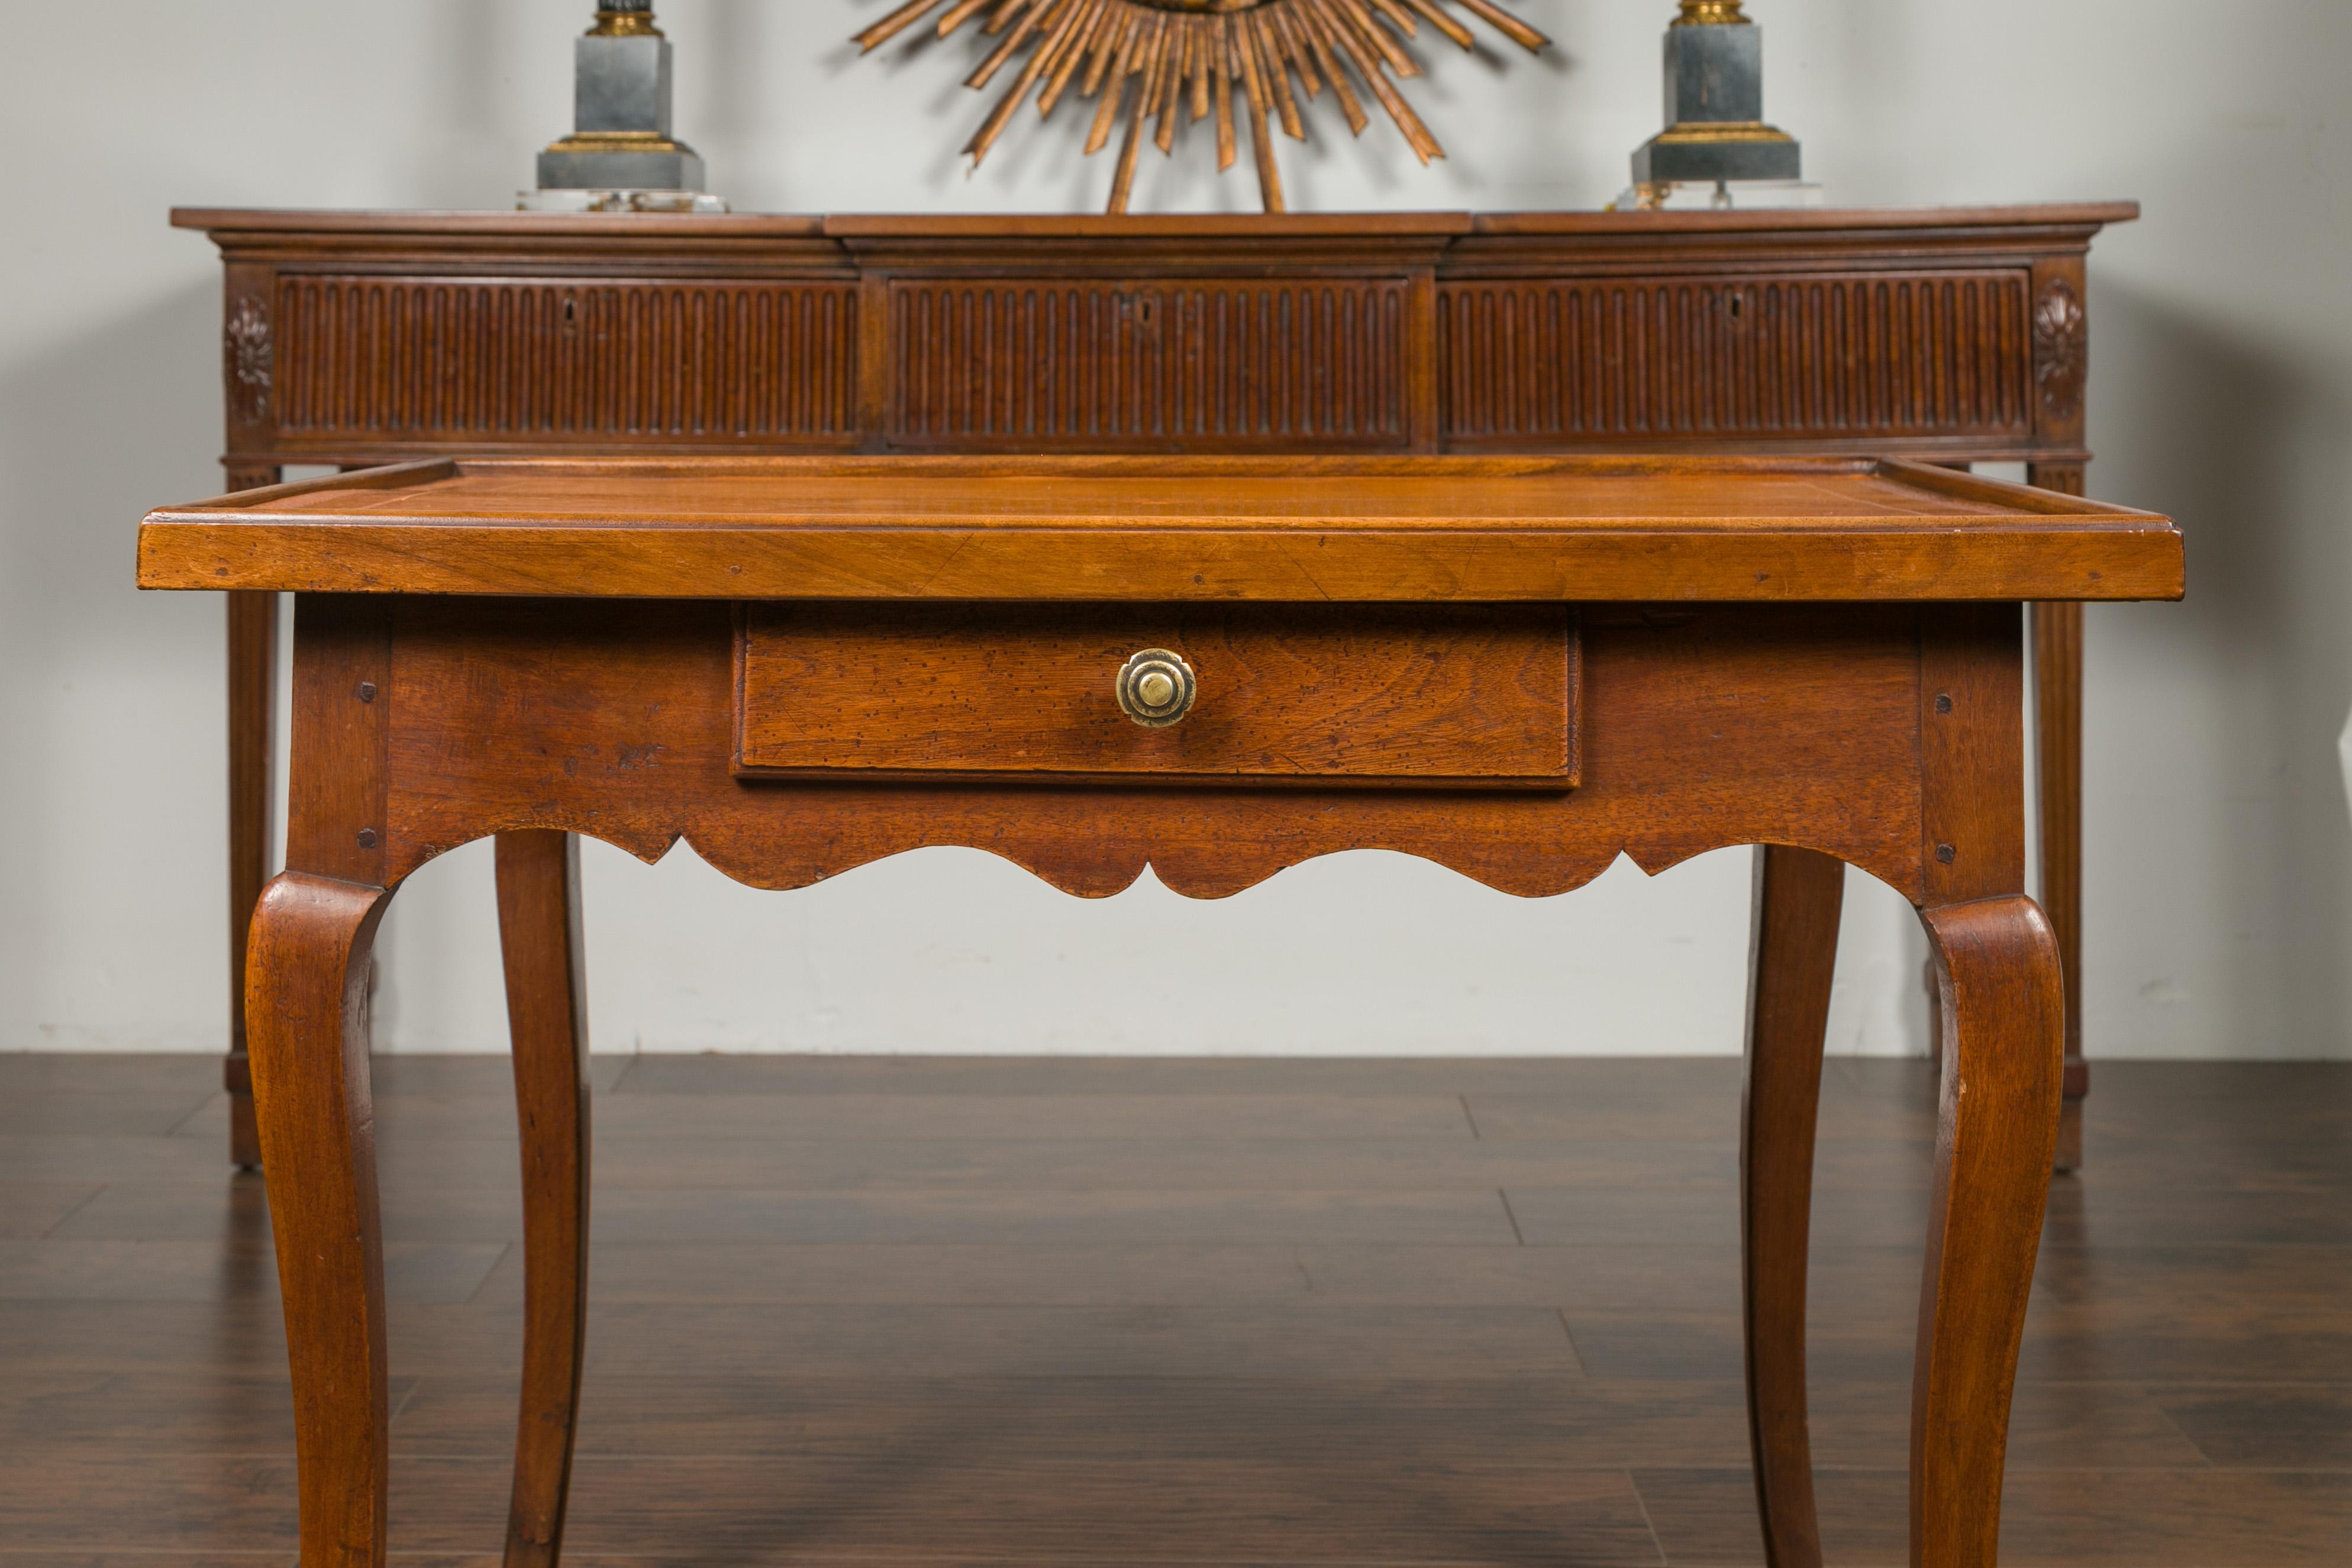 19th Century French Napoleon III Period 1850s Walnut Table with Leather Top and Single Drawer